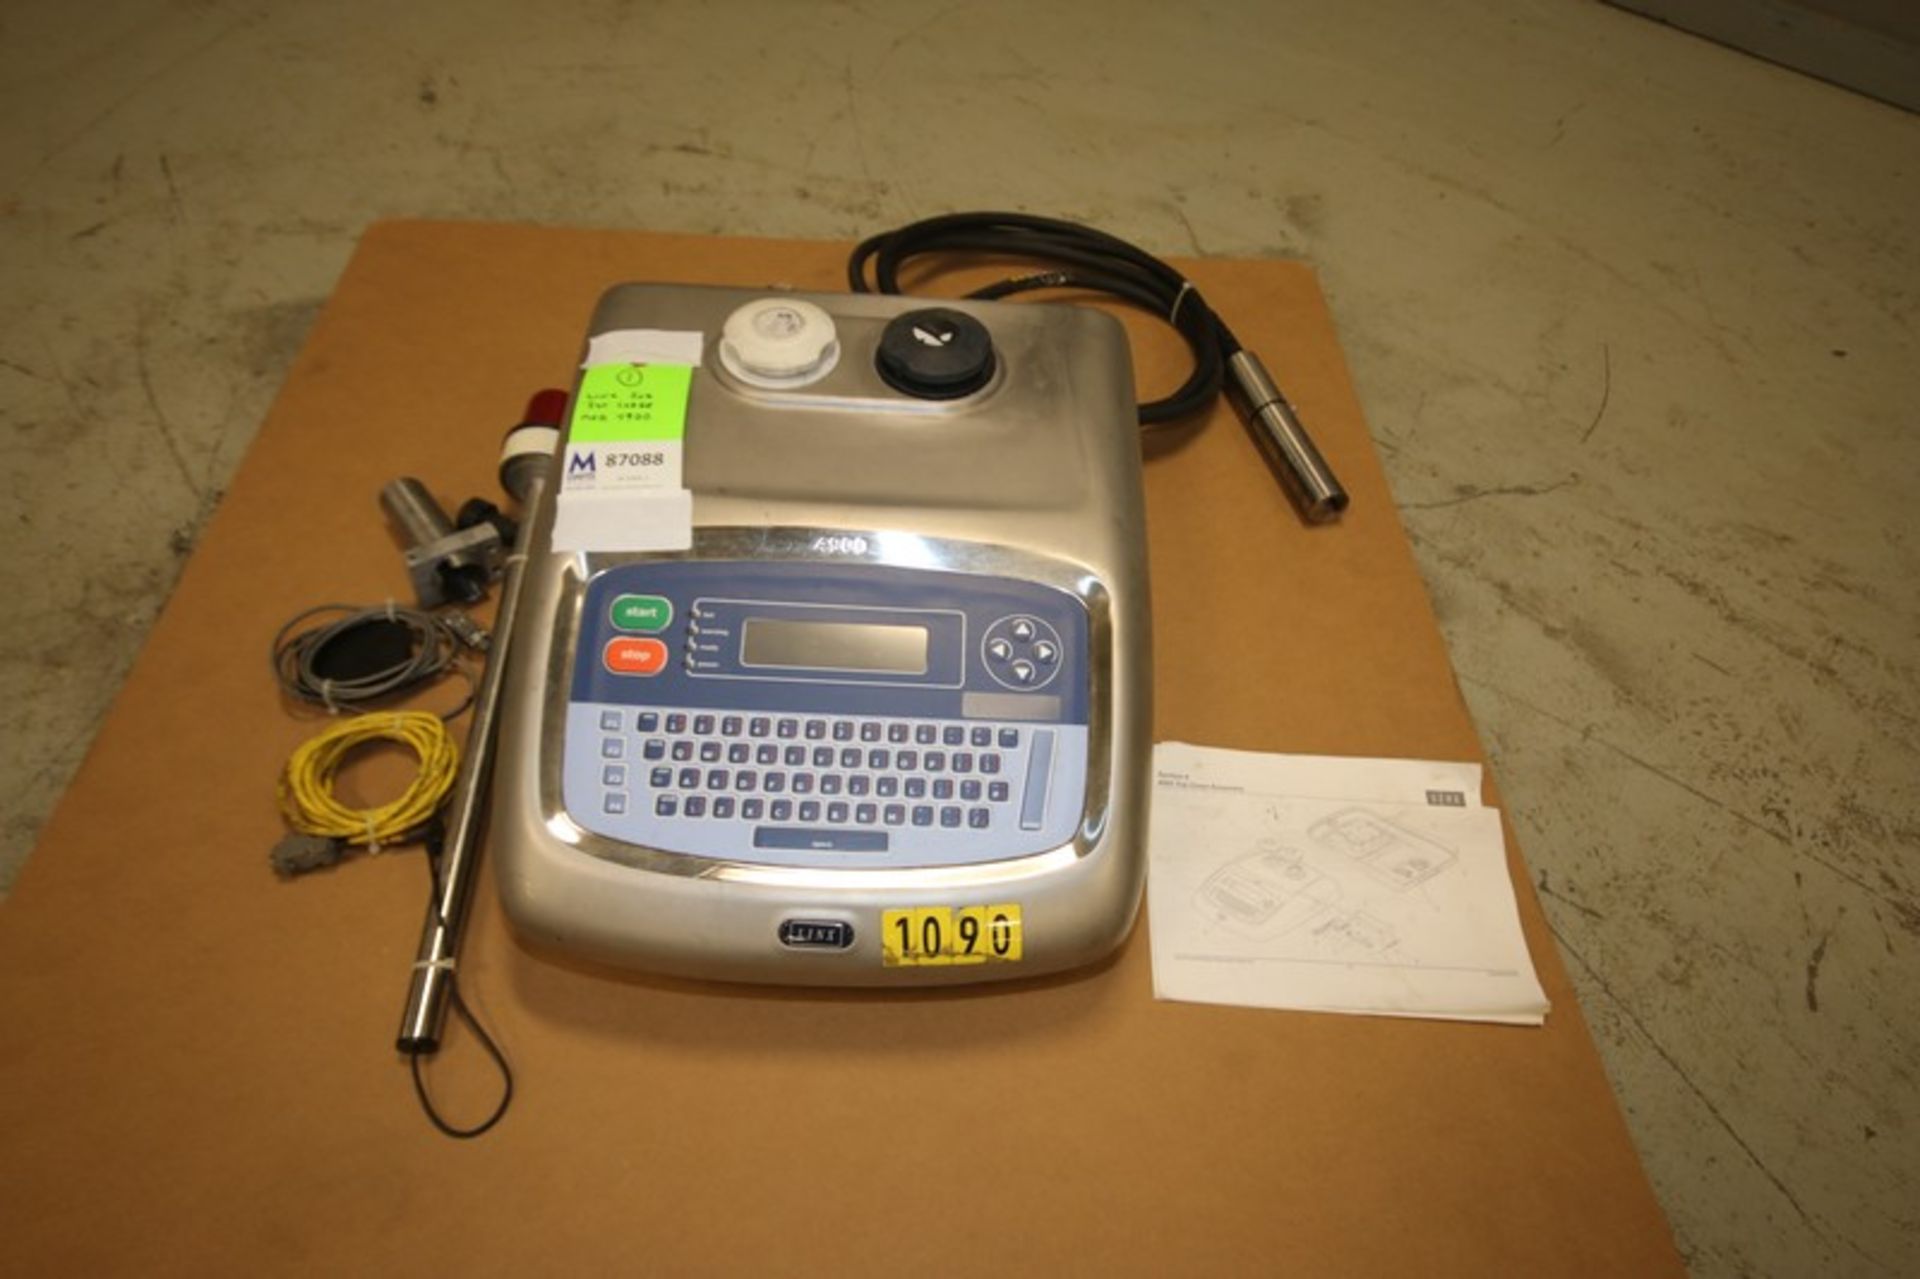 Linx Ink Jet Coder, Model 4900, SN BZ160, with Single Head, 2006 (INV#87088)(Located @ the MDG